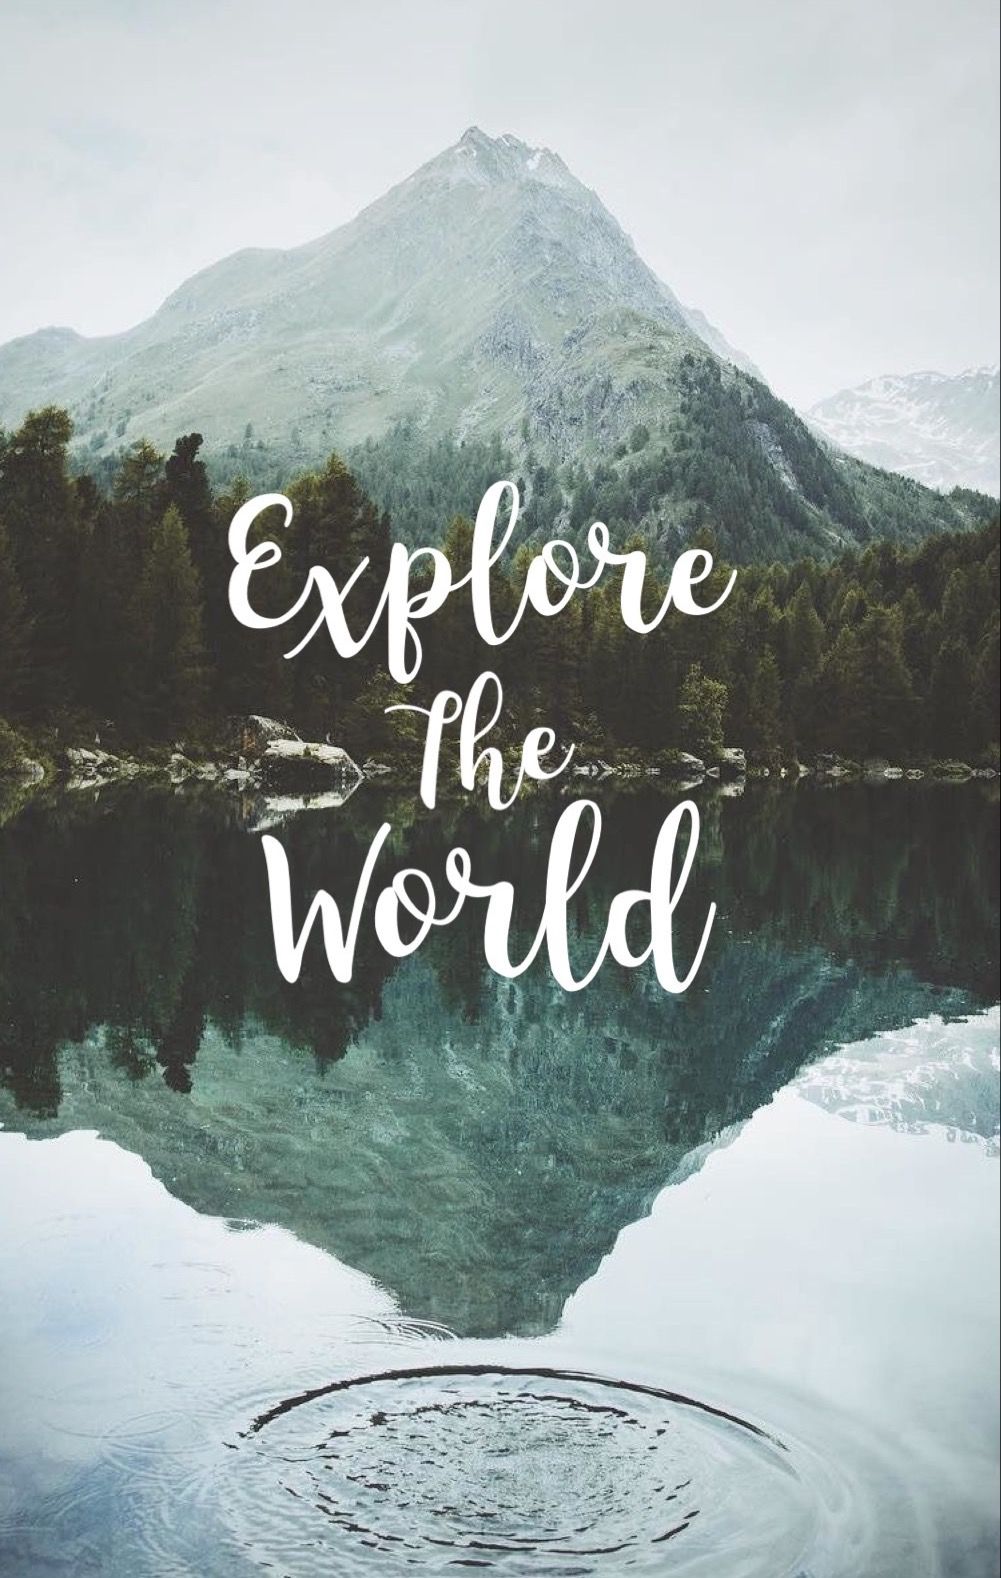 Dreams. Travel the world quotes, Travel quotes adventure, World quotes